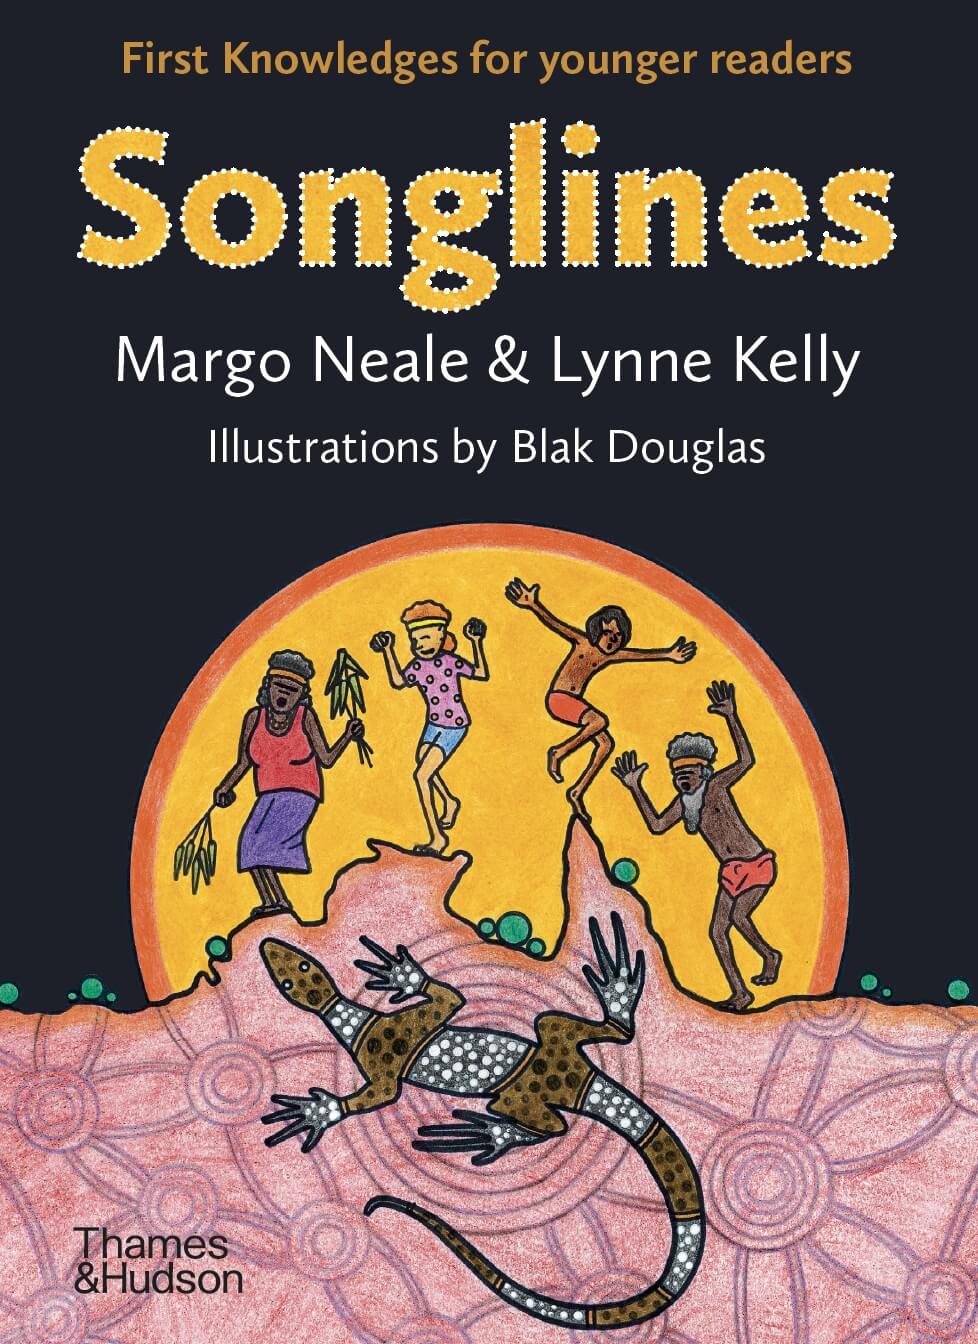 Book cover image featuring illustrated figures dancing across the top of Australia with sun behind them and a goanna below. Black background.